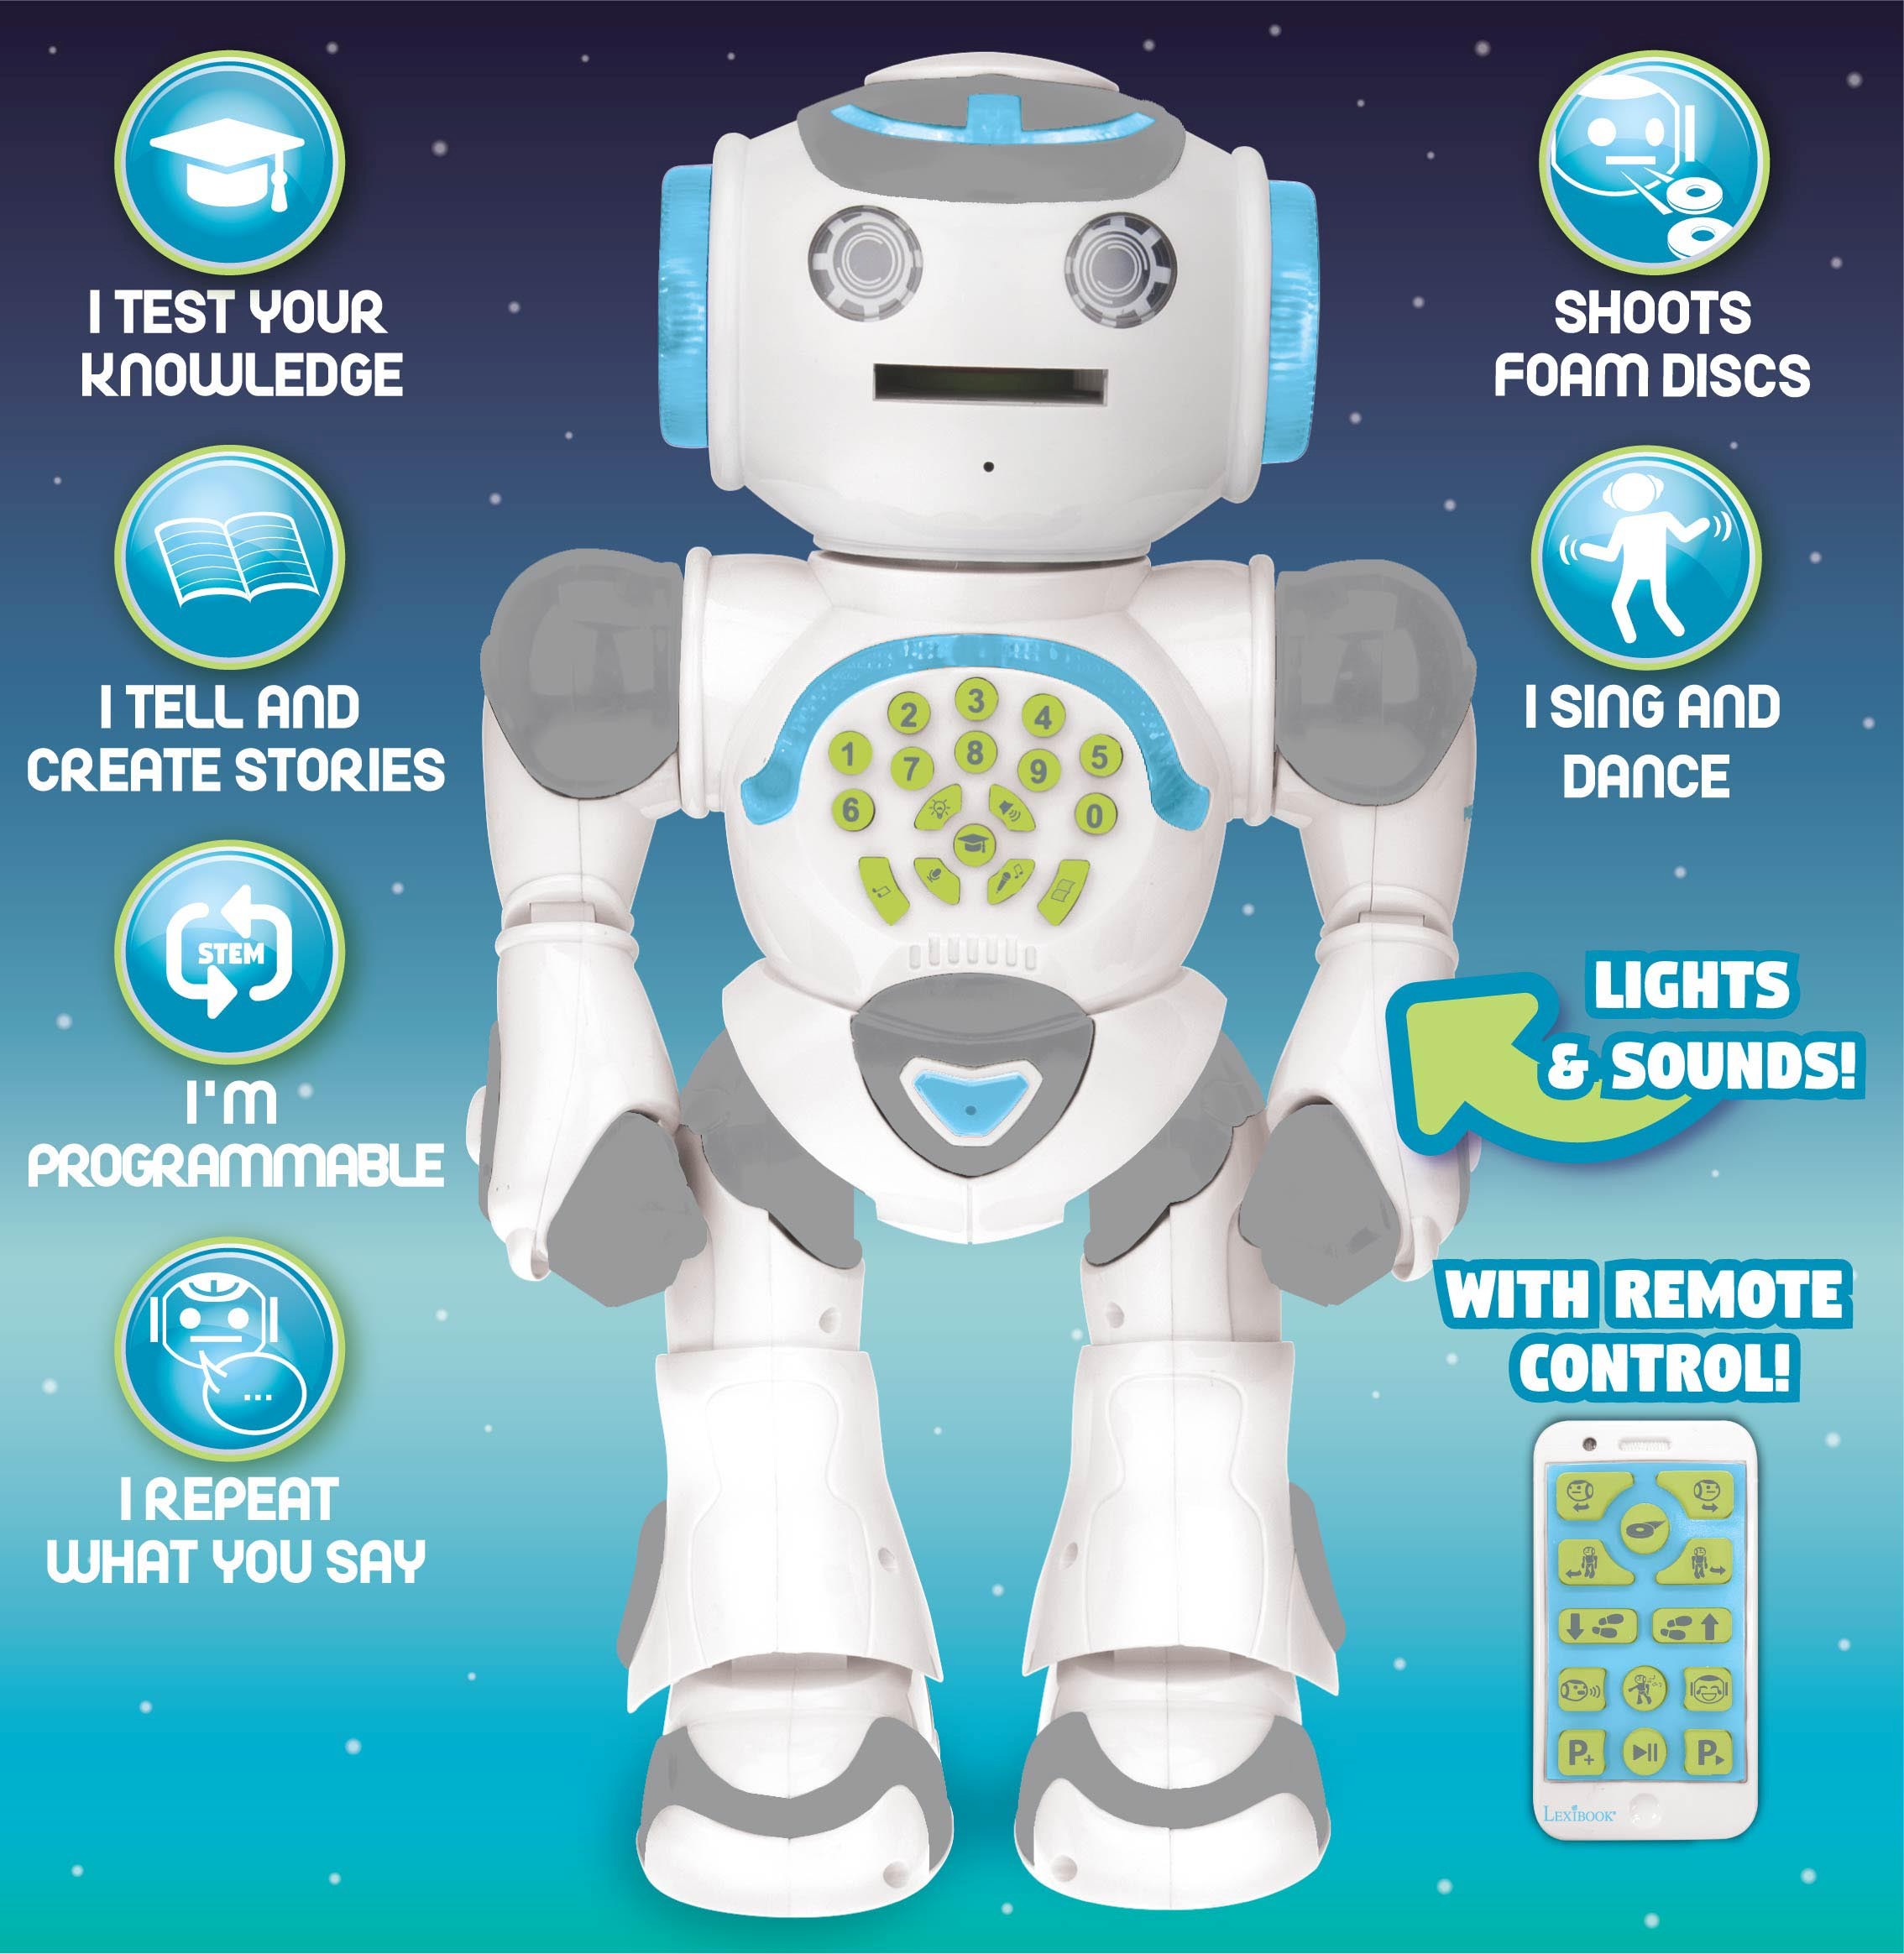 Be the first to write a review Lexibook Powerman Kids Robot